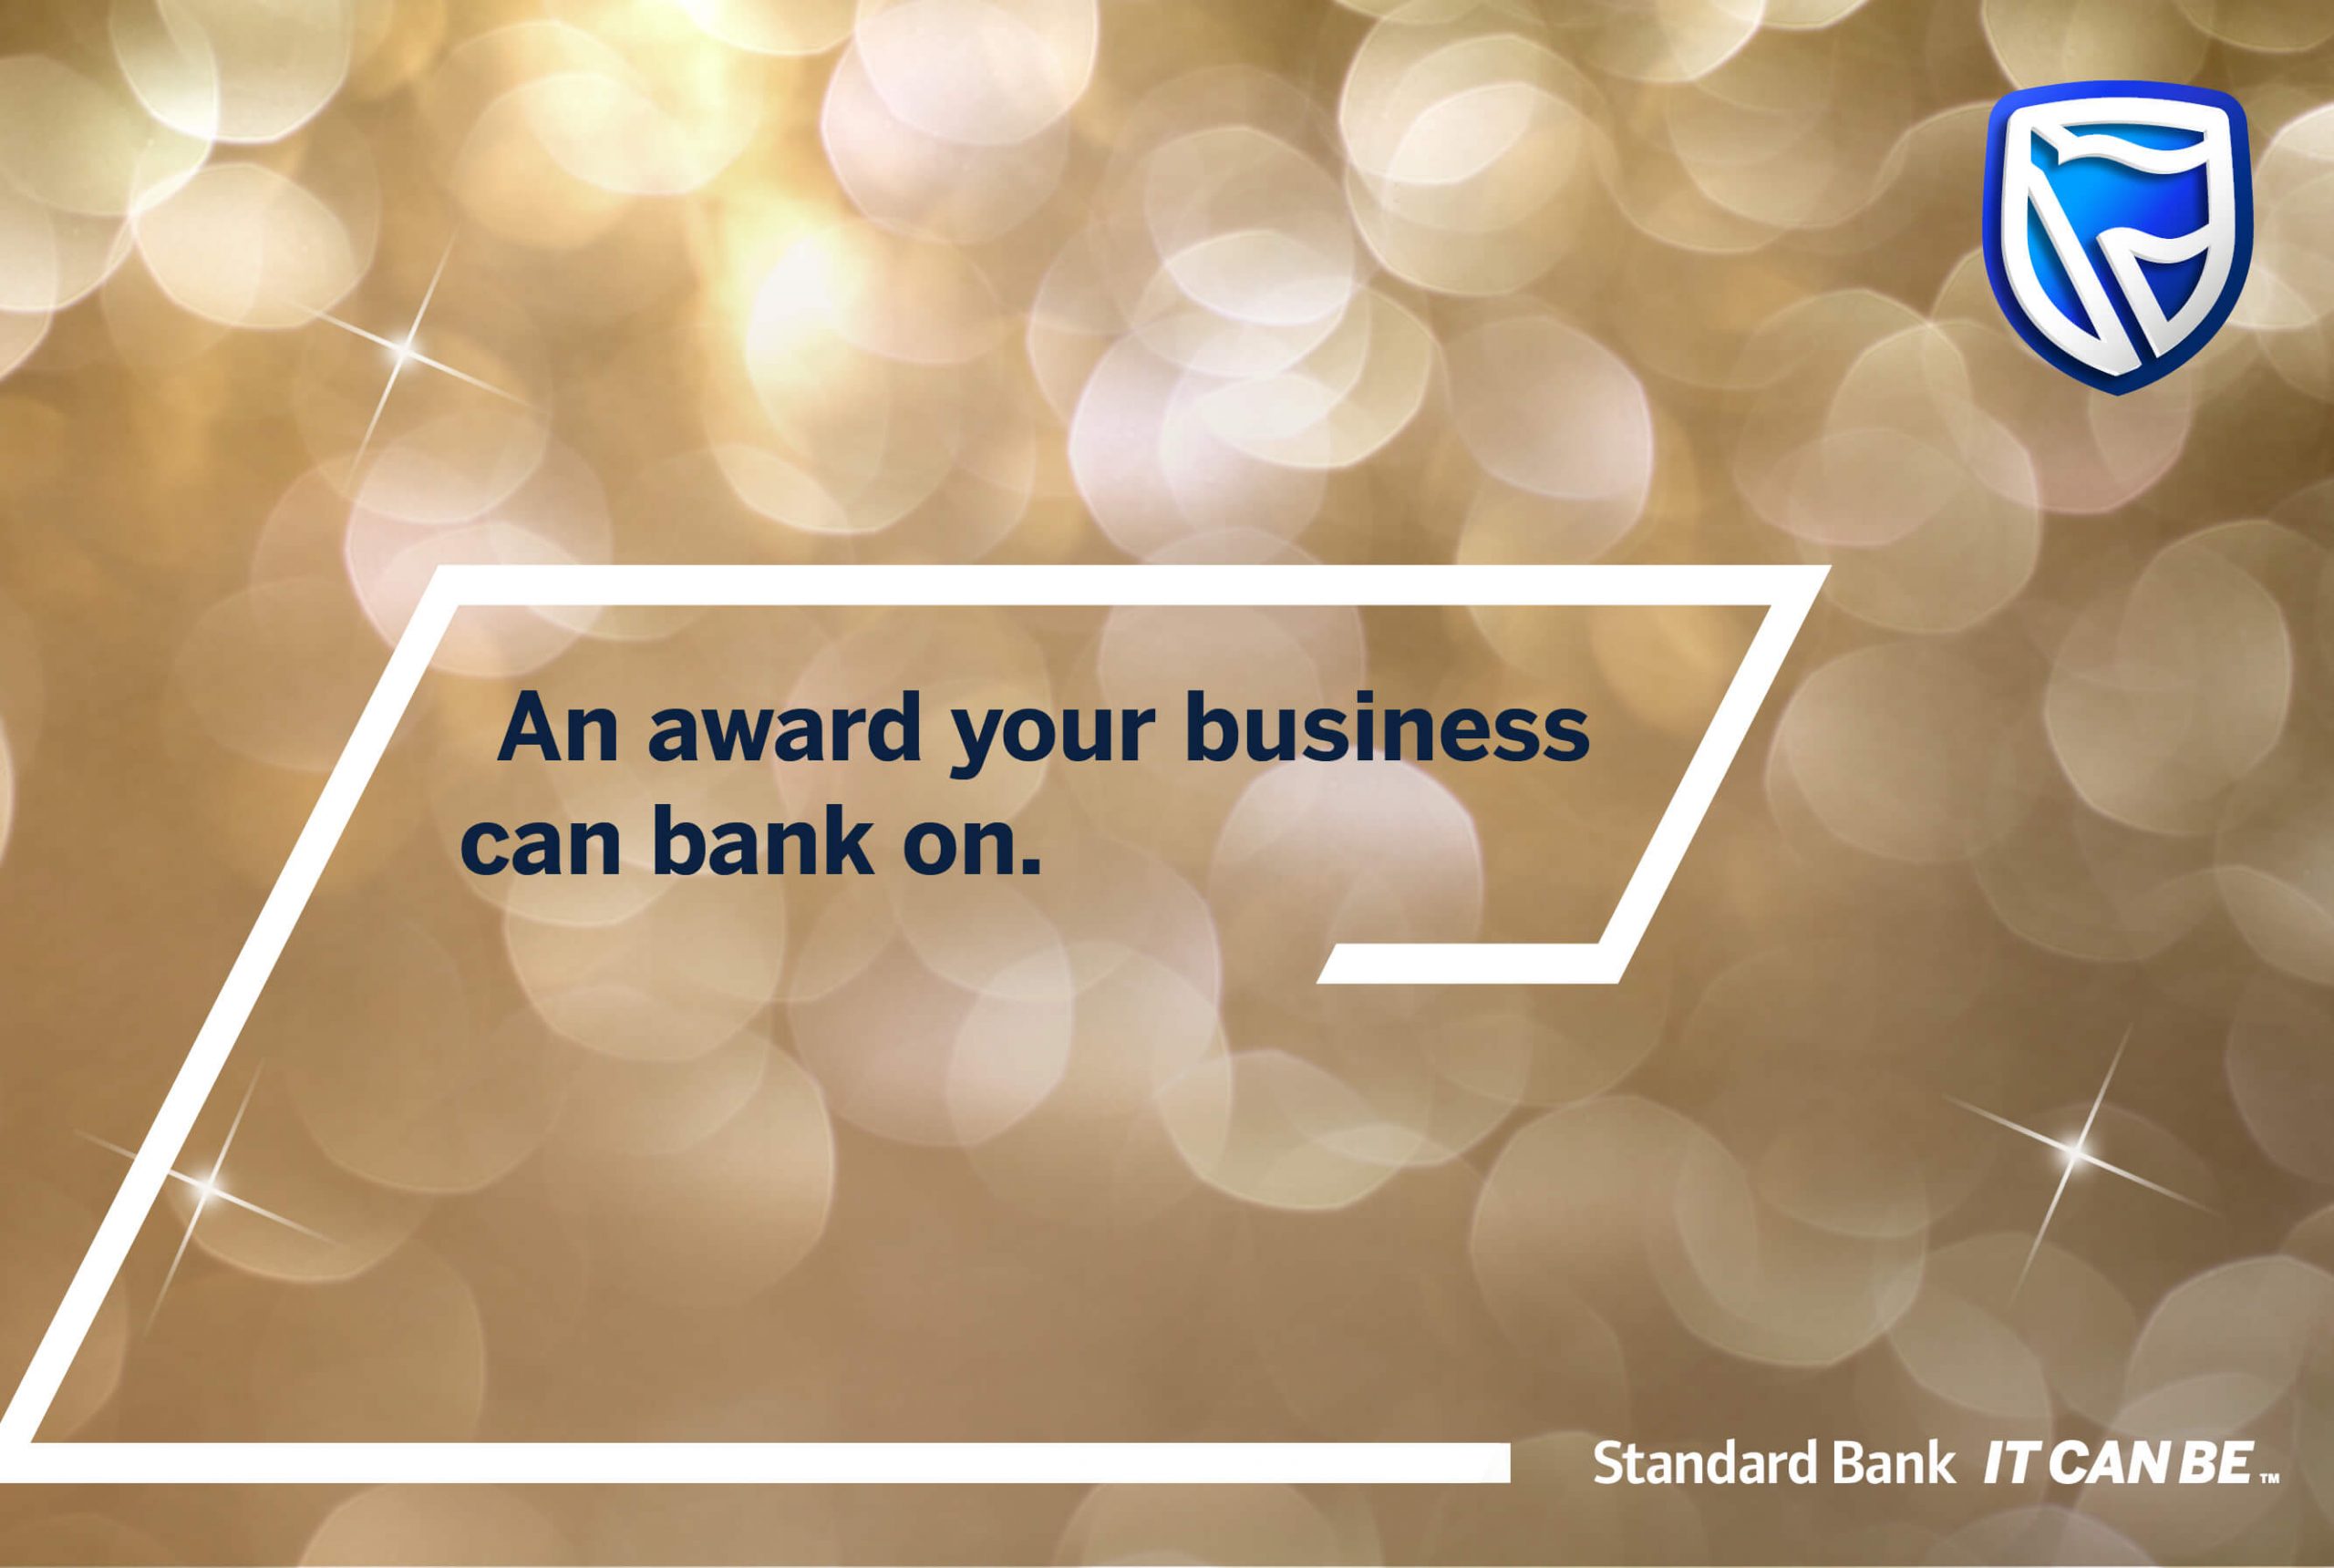 Standard Bank Launches Business Banking Awards Worth R4.5 Million in Granting Funds